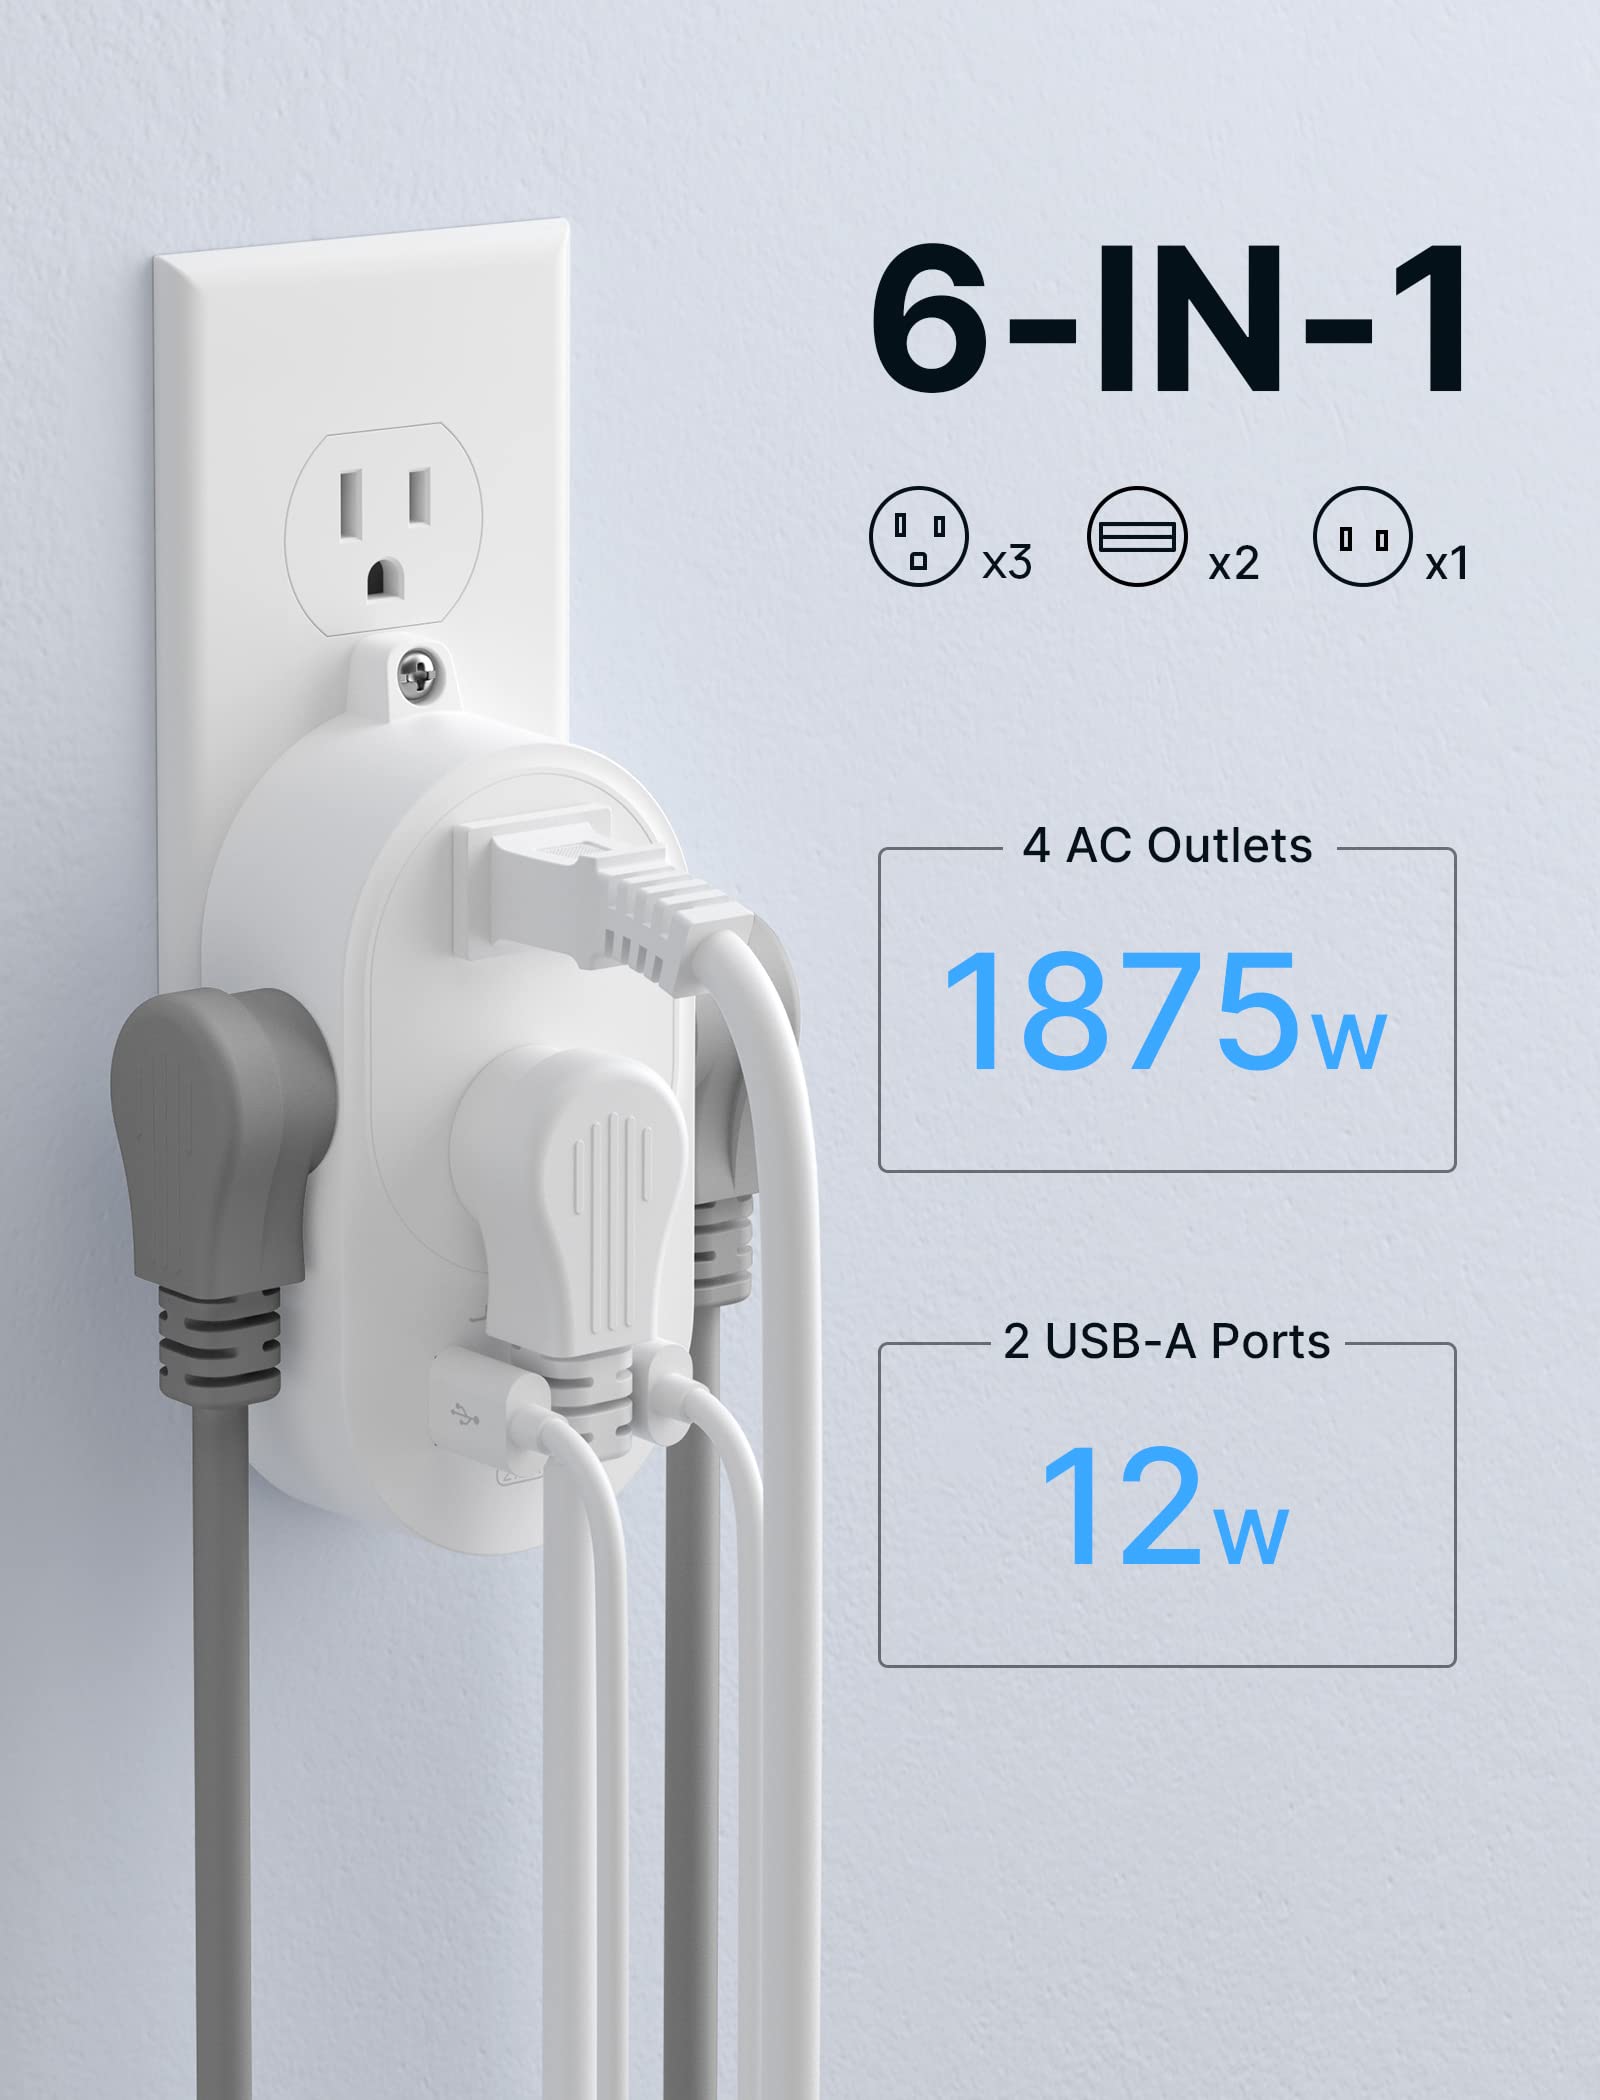 JSAUX Outlet Extenders: 4 Outlet & 2 USB Ports (Smart 2.4A)  $8.99 + FS w/ Prime or Orders $25+